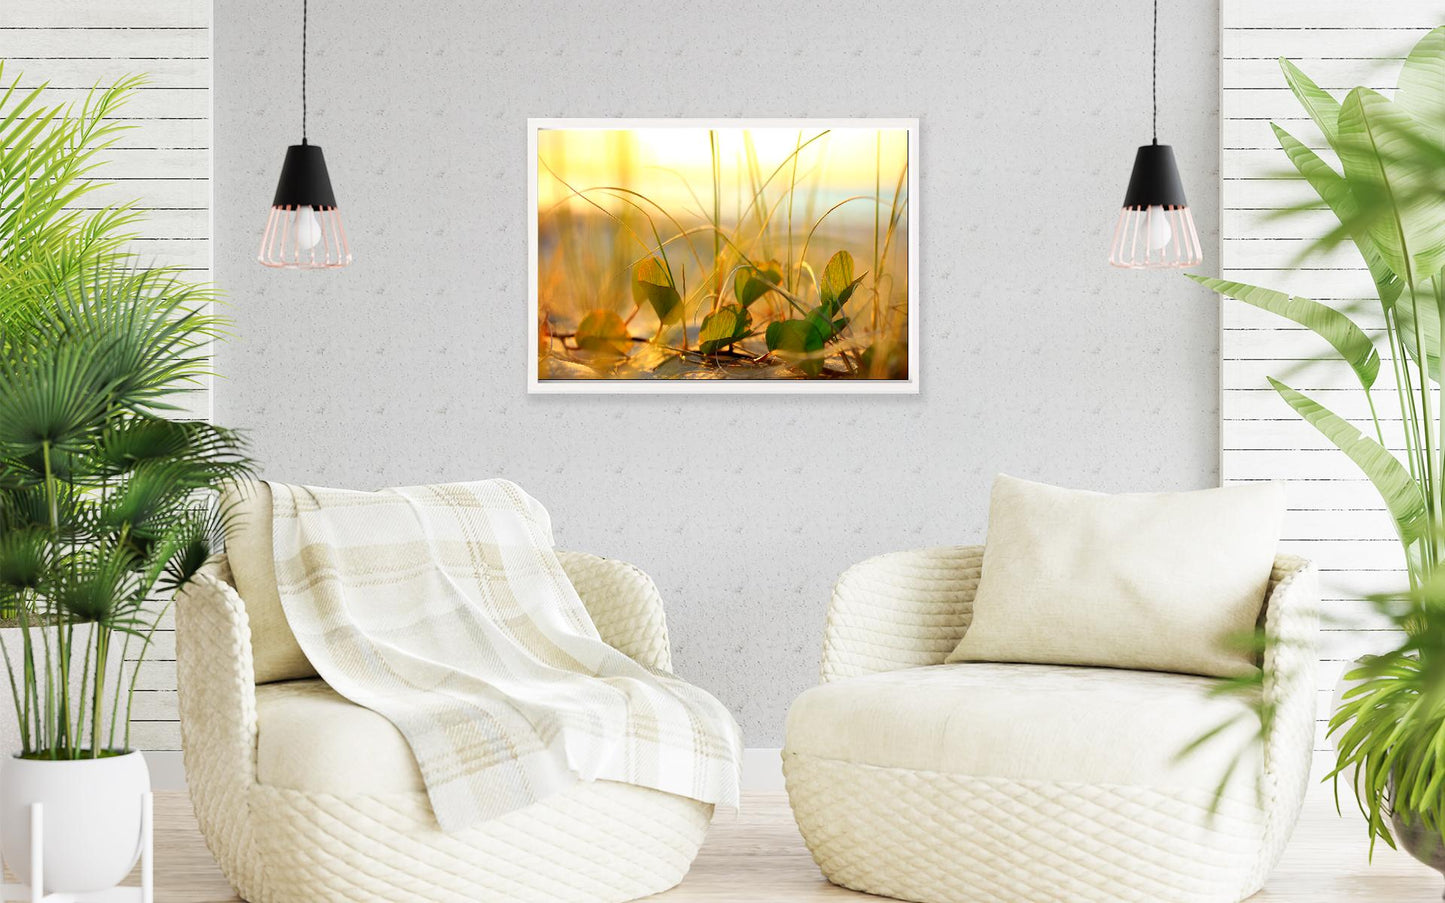 Image 19 - Seagrass-frame-1